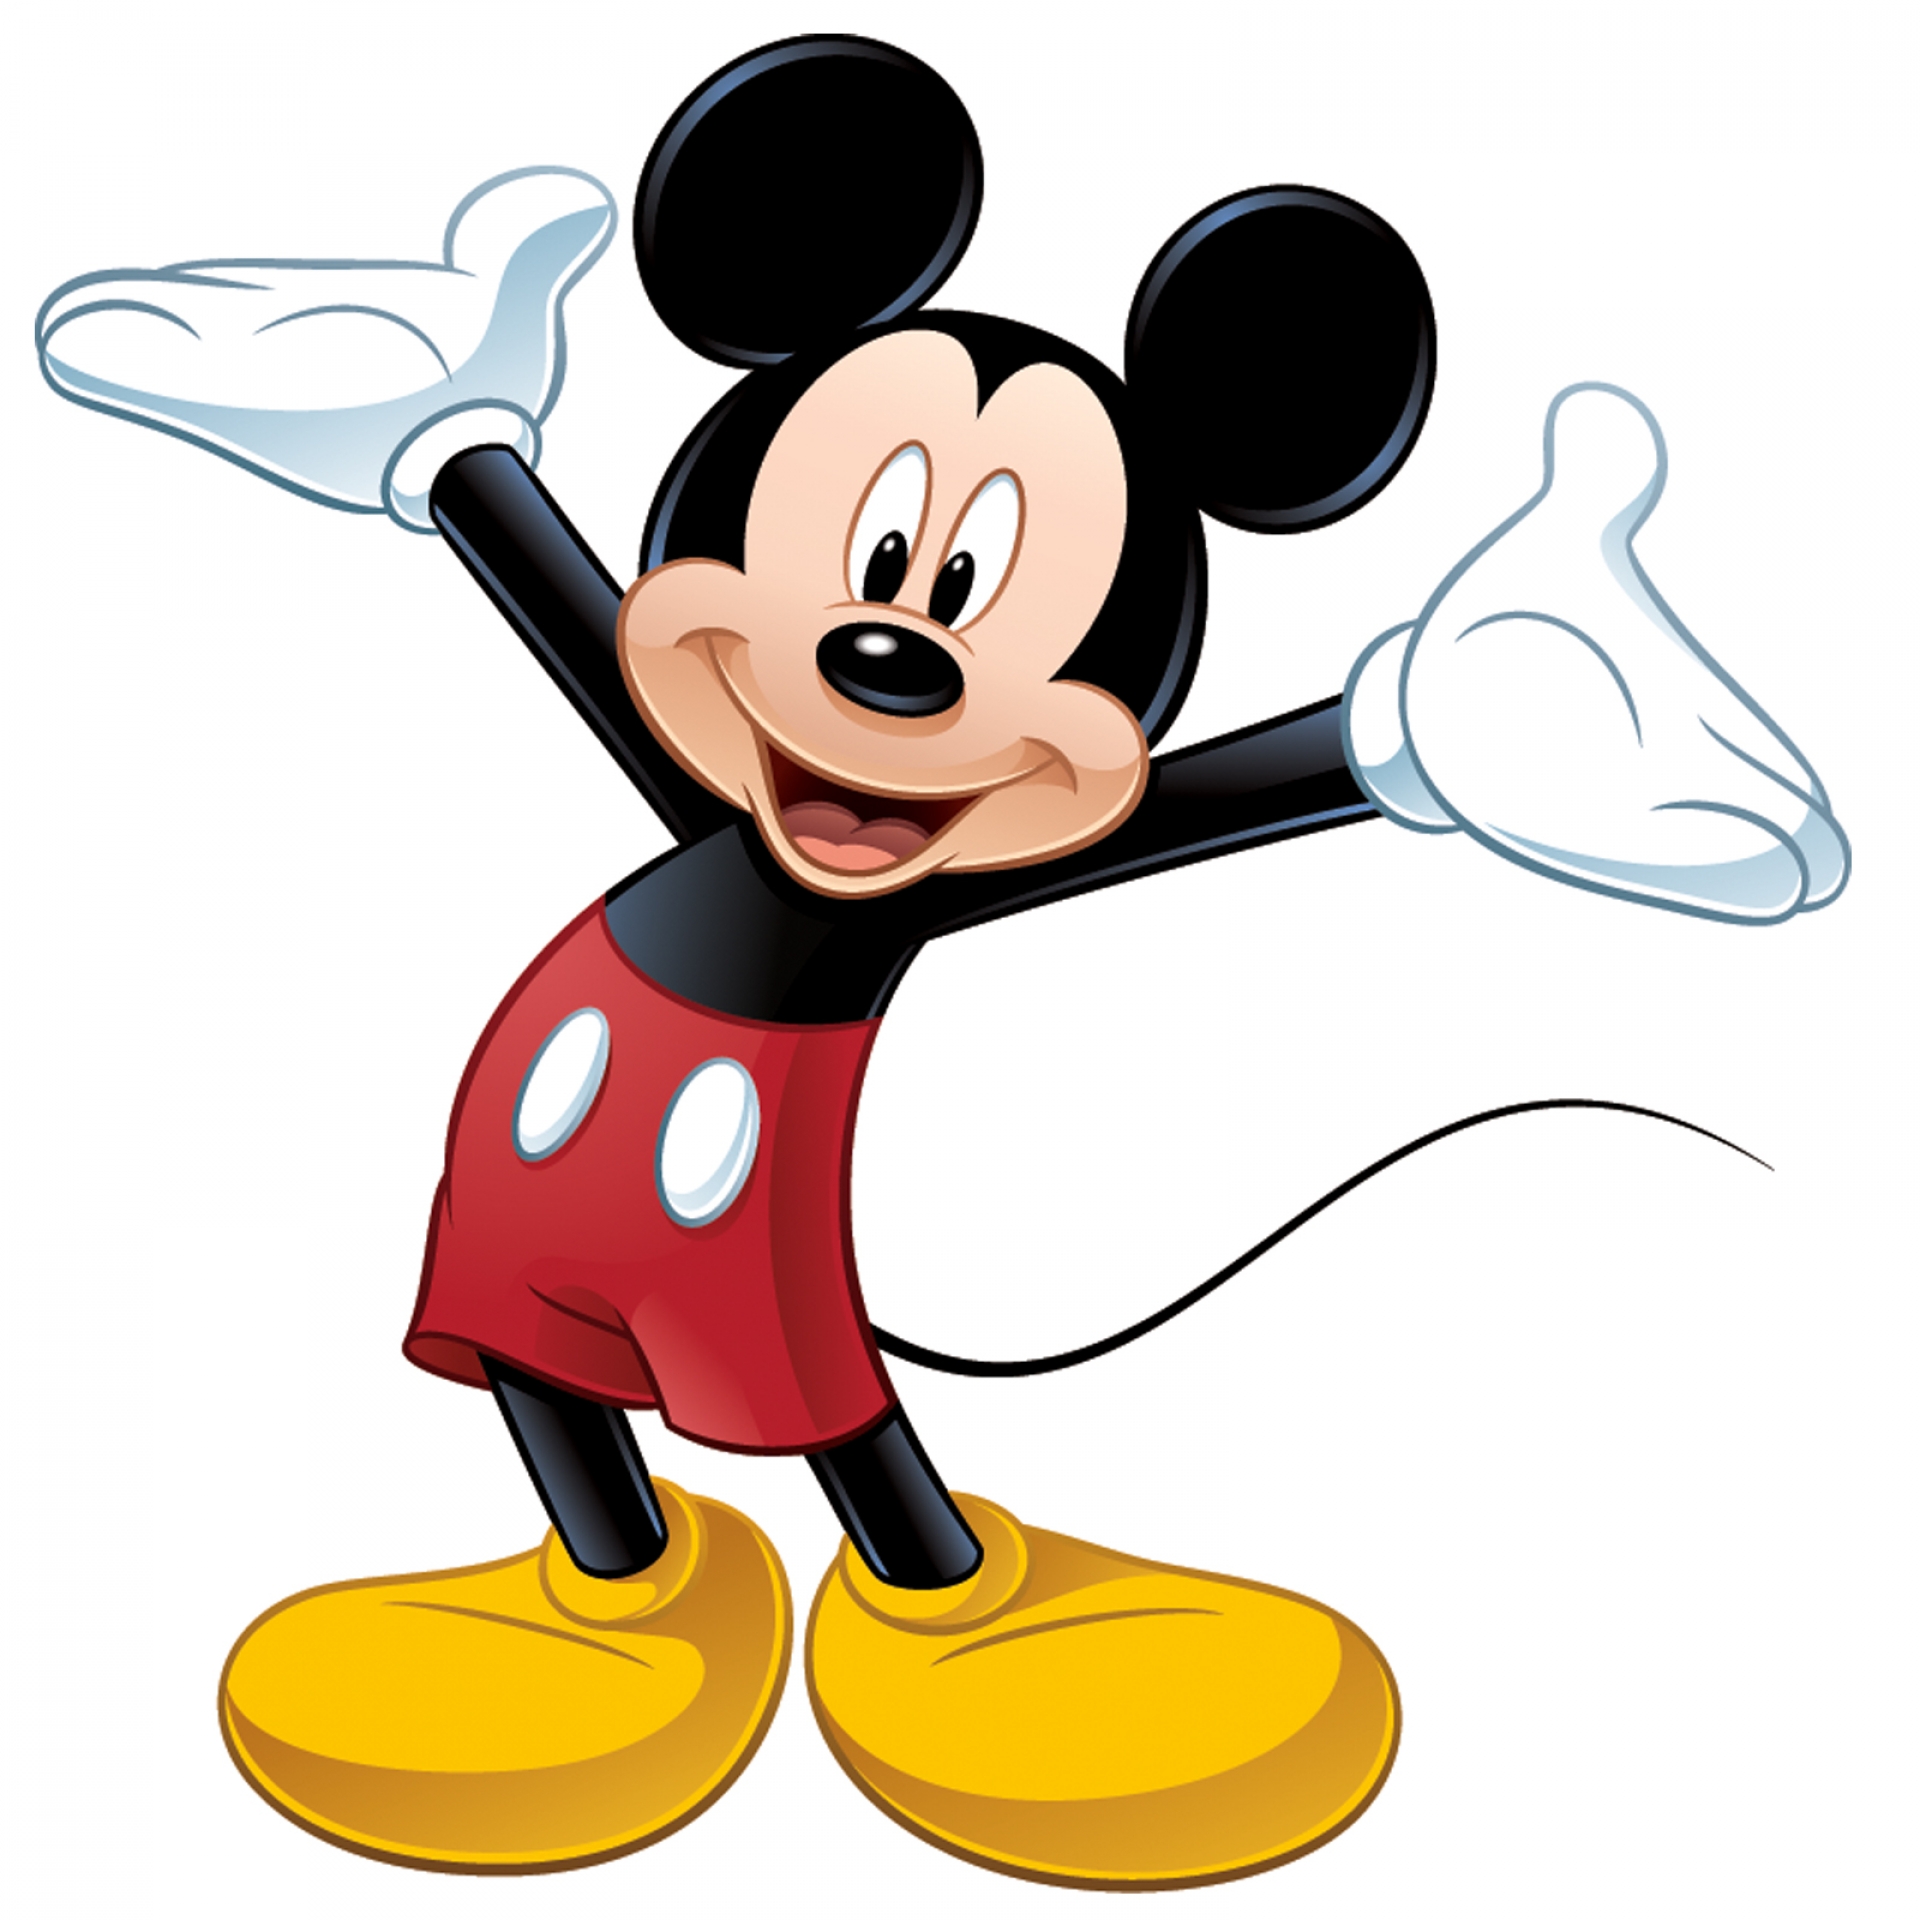 Mickey mouse giant wall decal thepartyworks